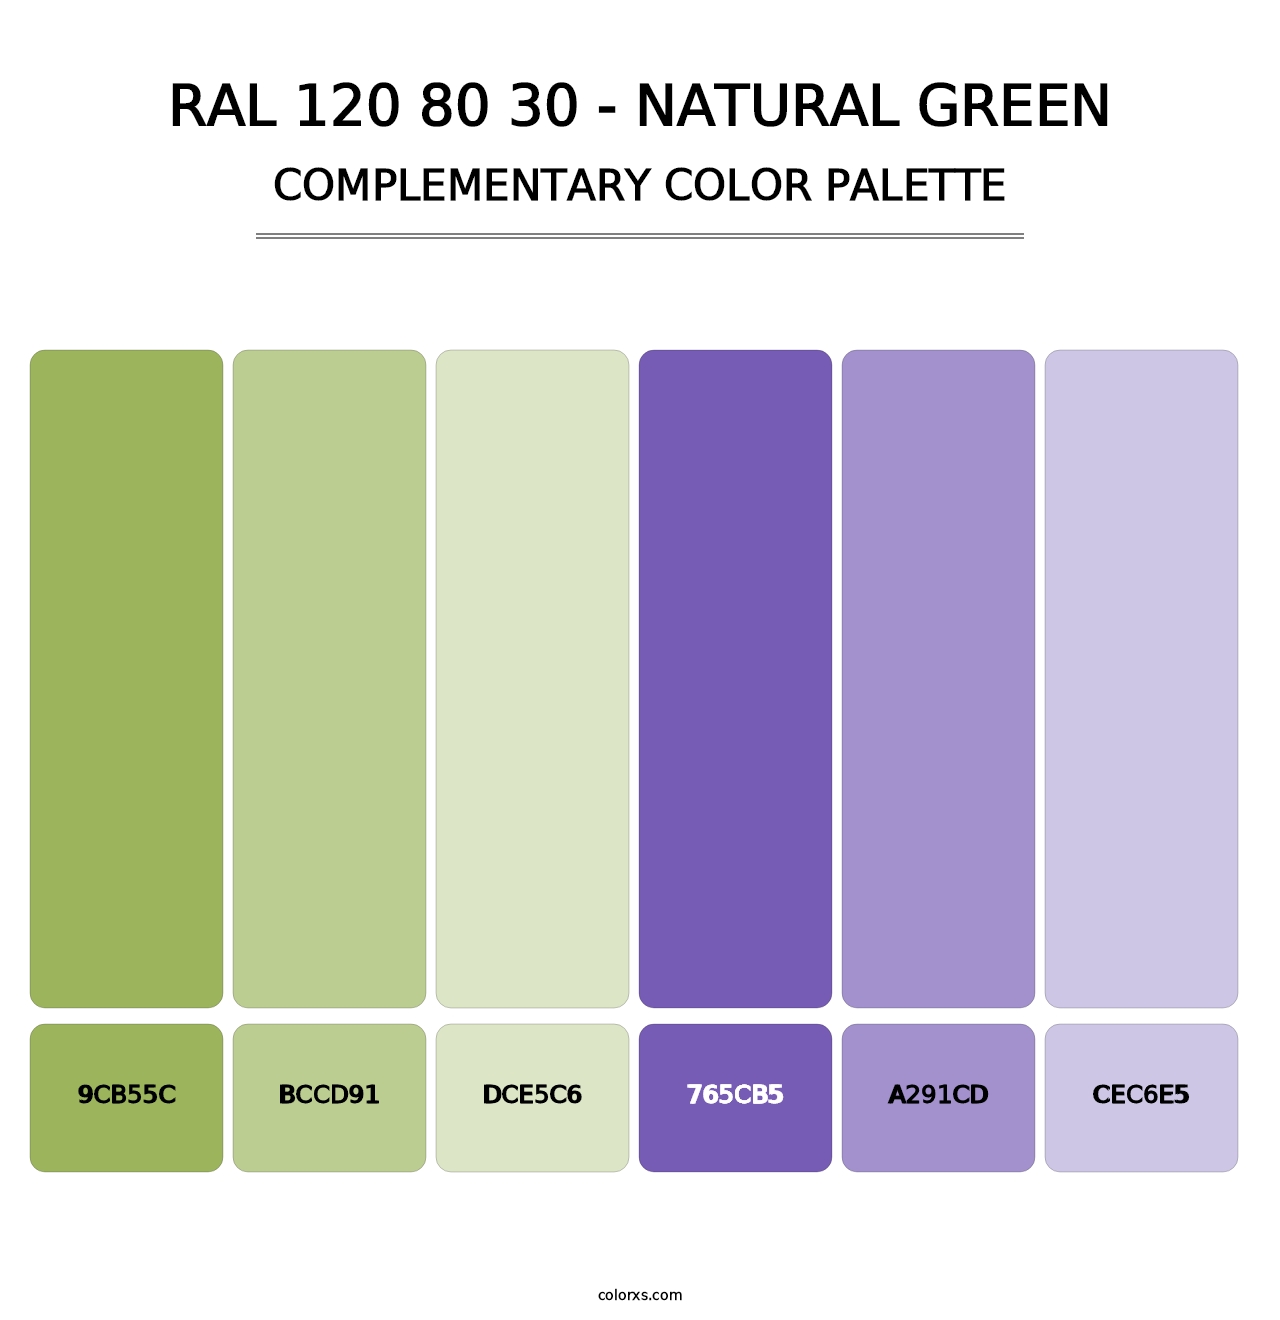 RAL 120 80 30 - Natural Green - Complementary Color Palette